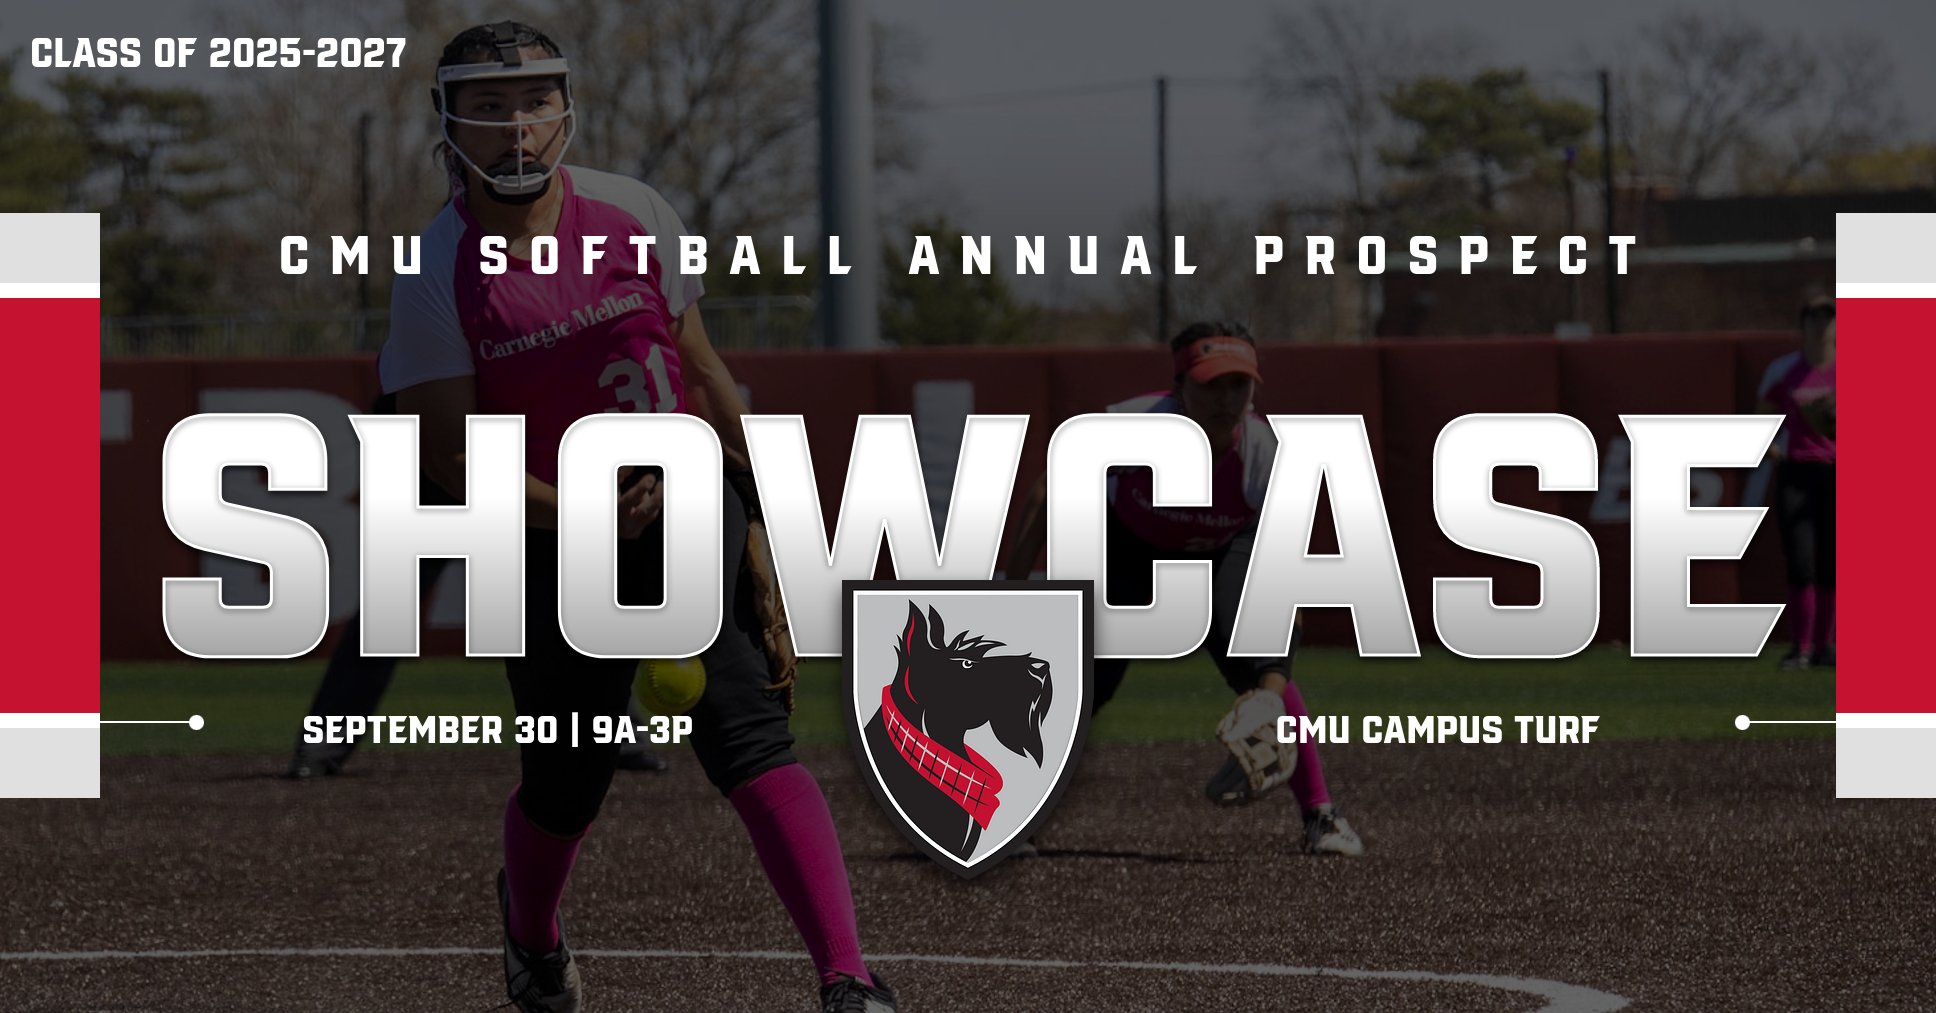 softball player in background with text covering image saying CMU Softball Annual Prospect Showcase